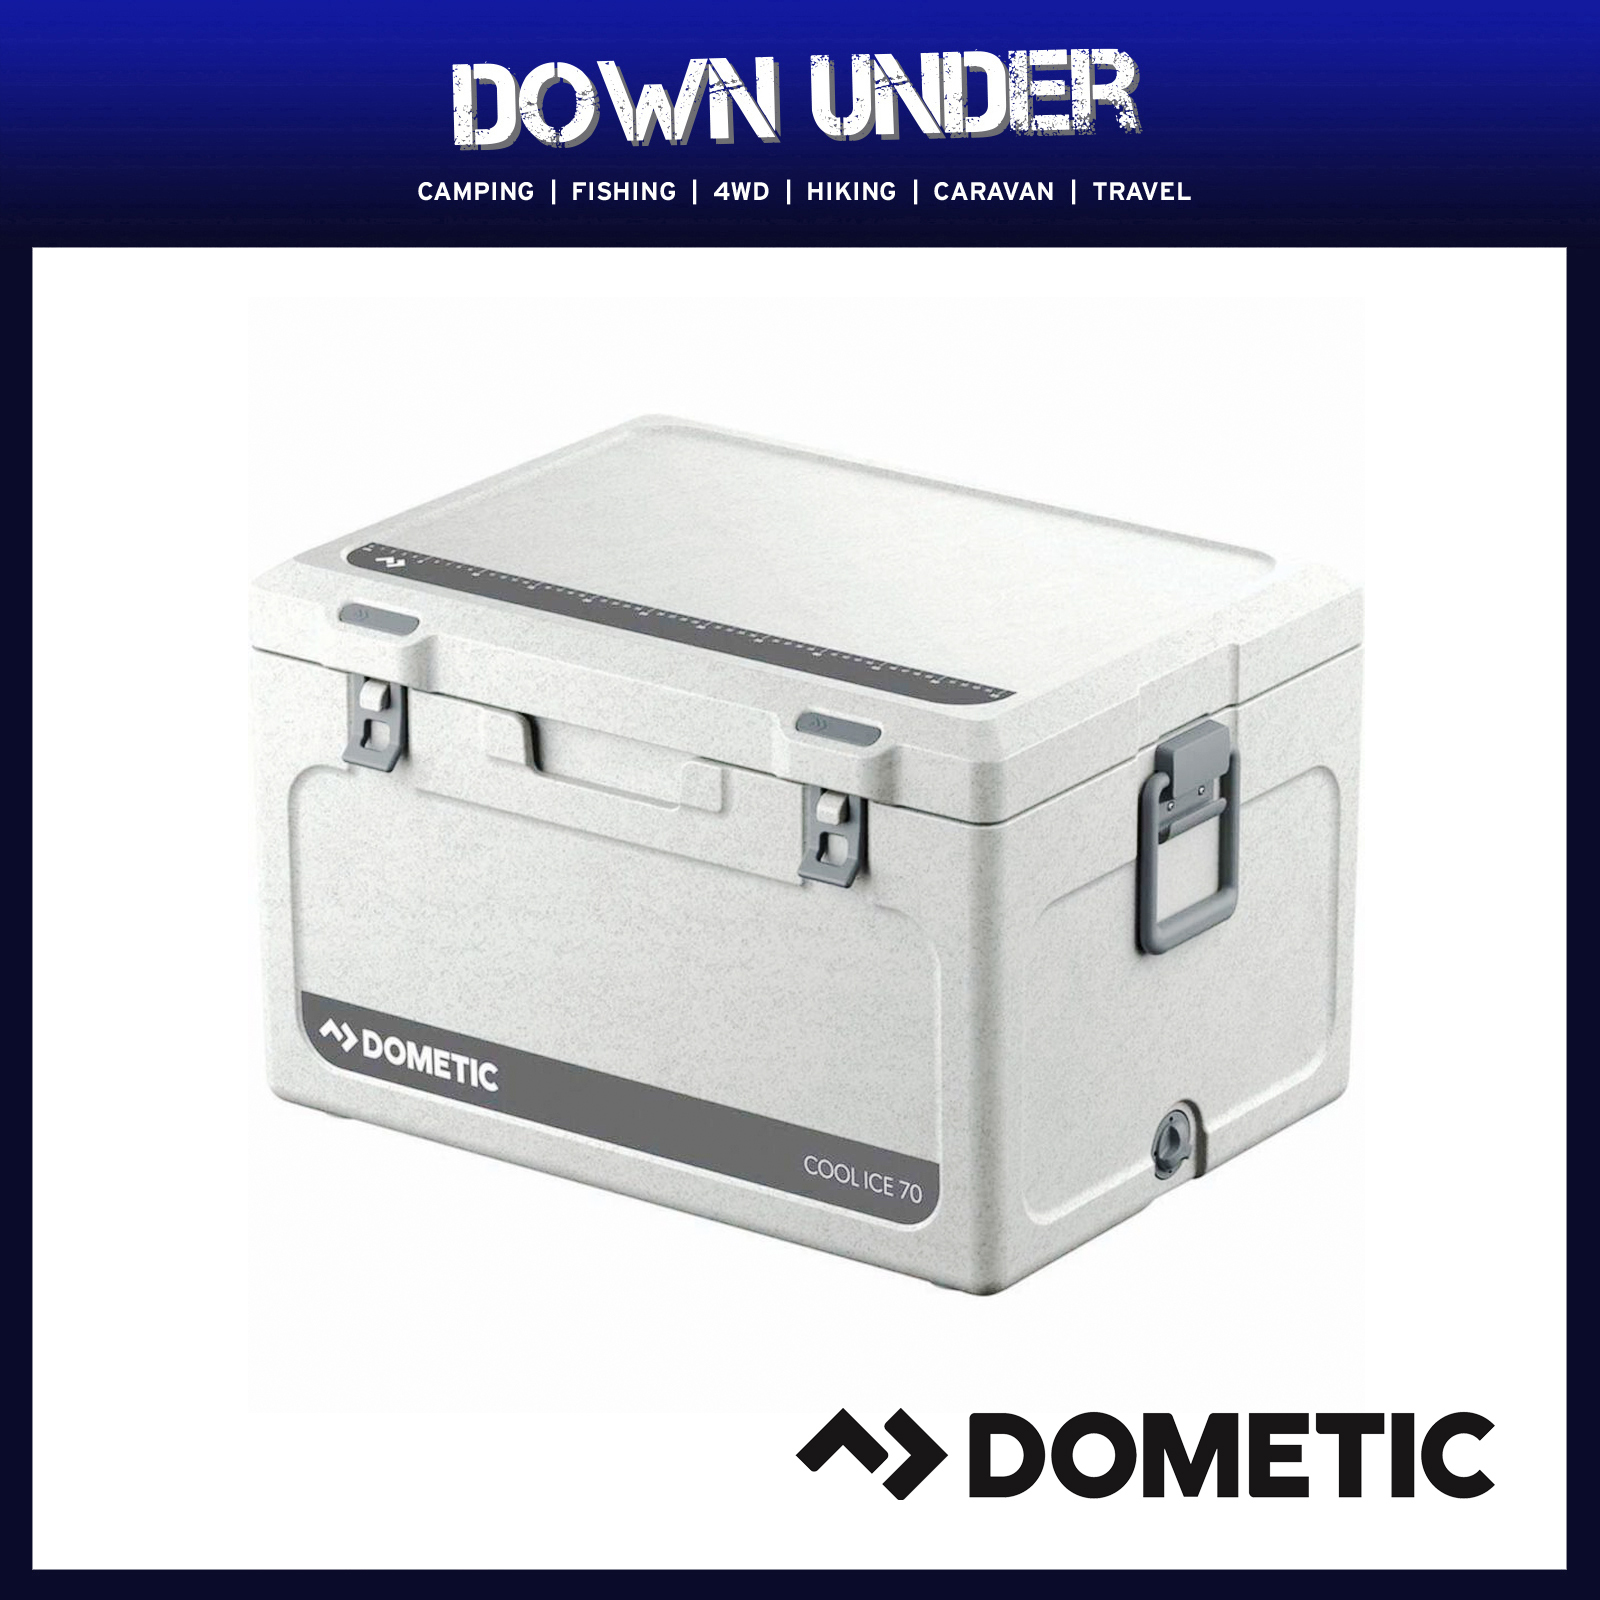 Dometic Cool Ice Rotomoulded Icebox - 71L